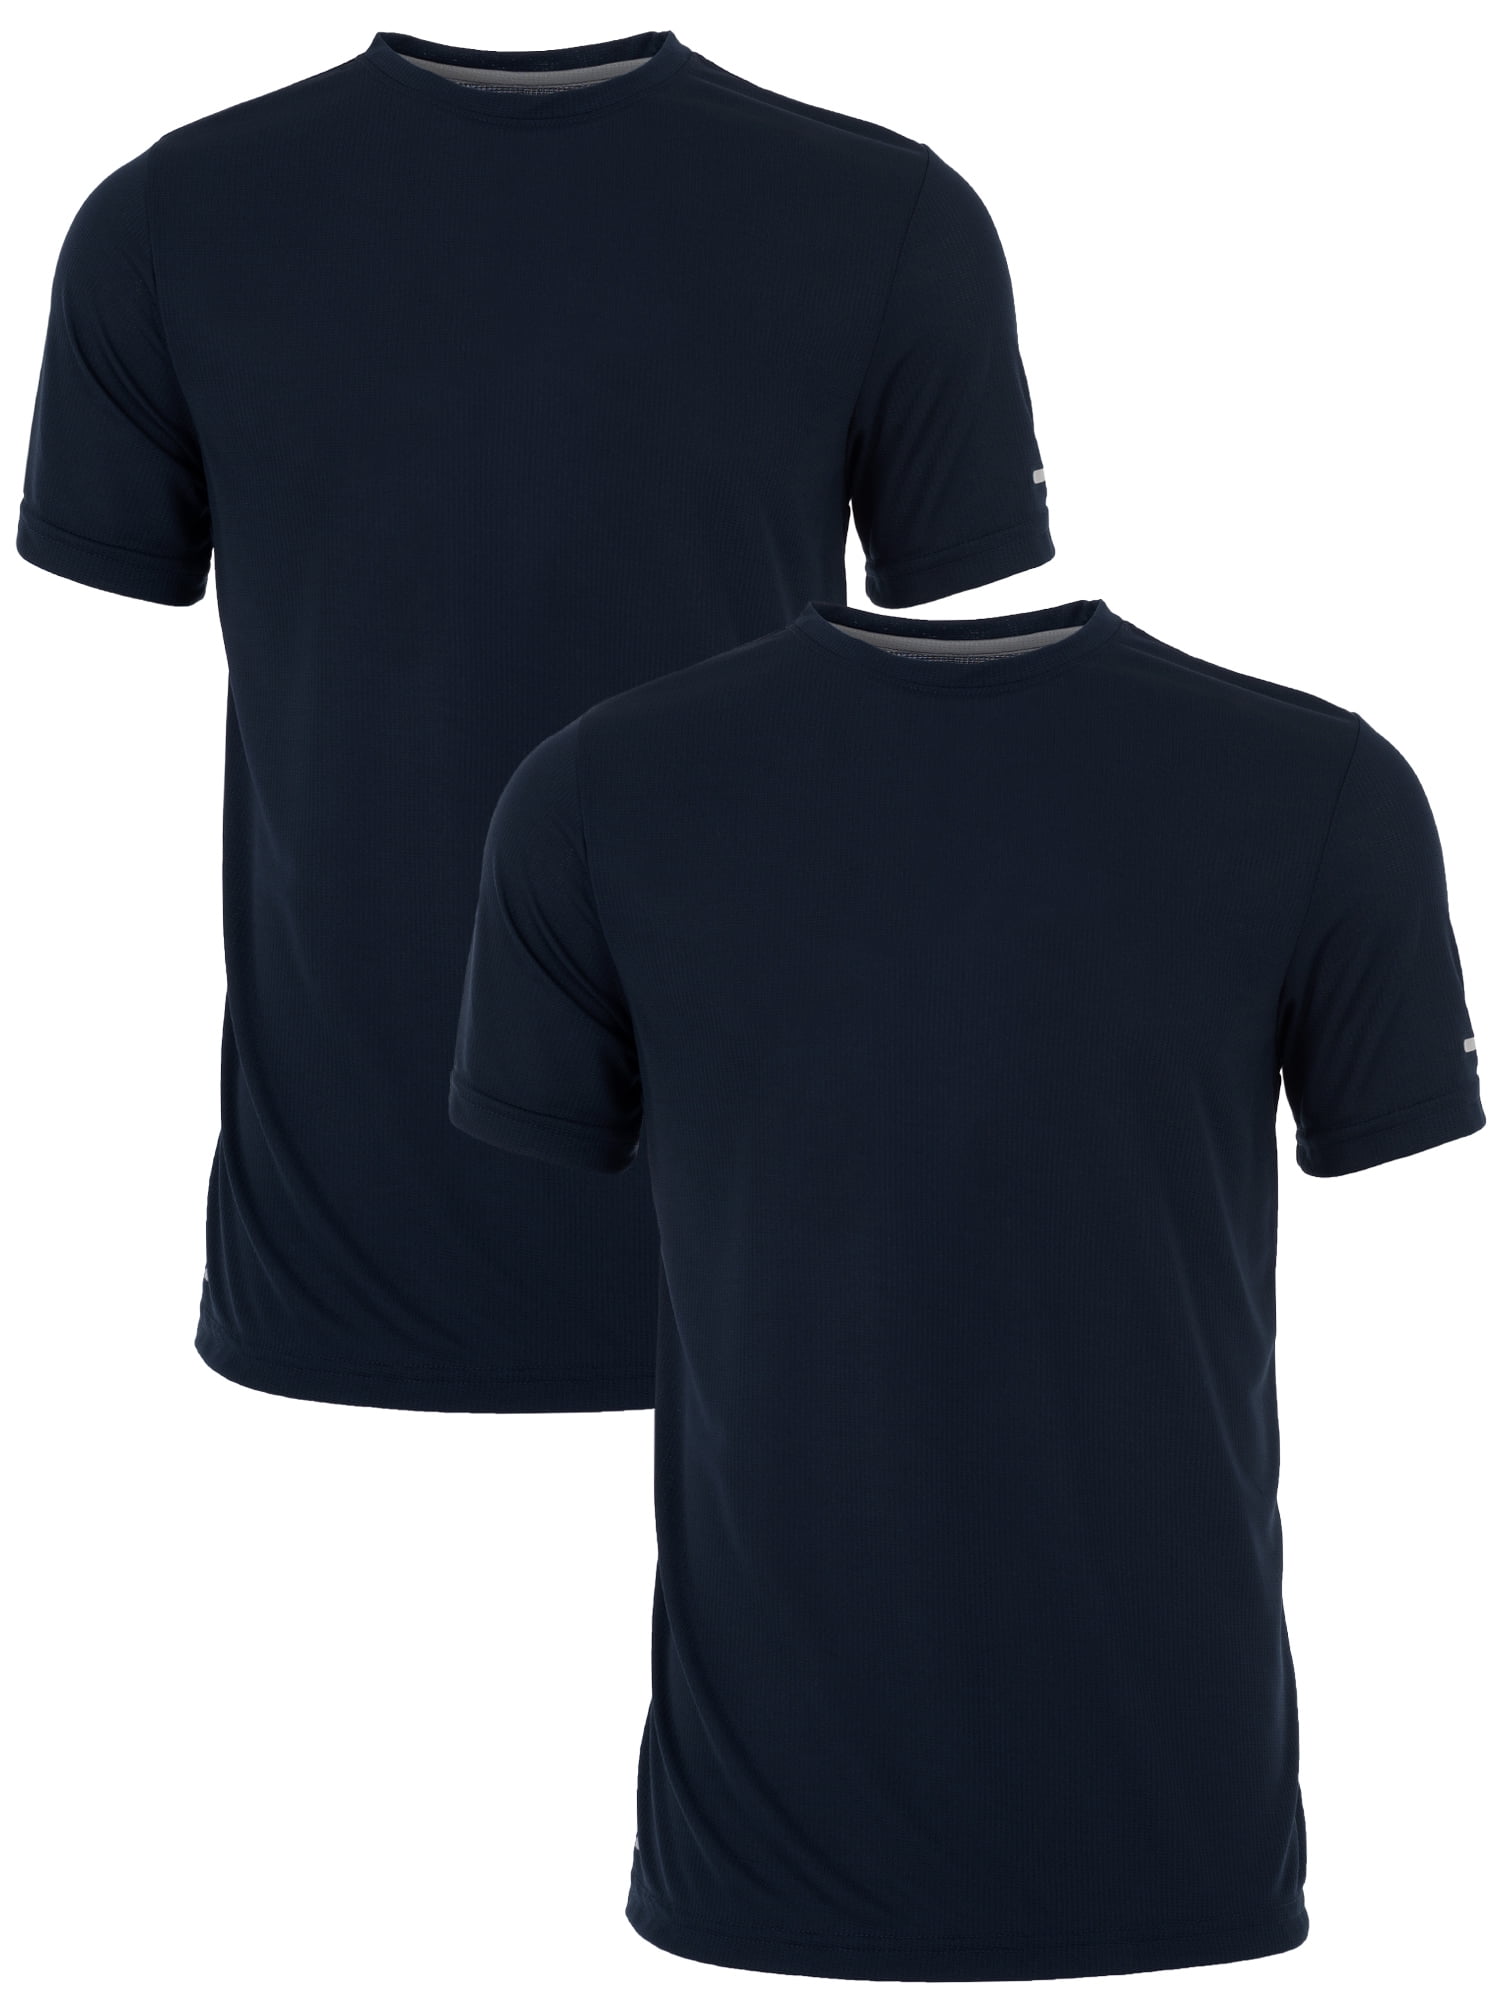 athletic-works-athletic-works-men-s-quick-dry-performance-mesh-short-sleeve-tee-2-pack-value